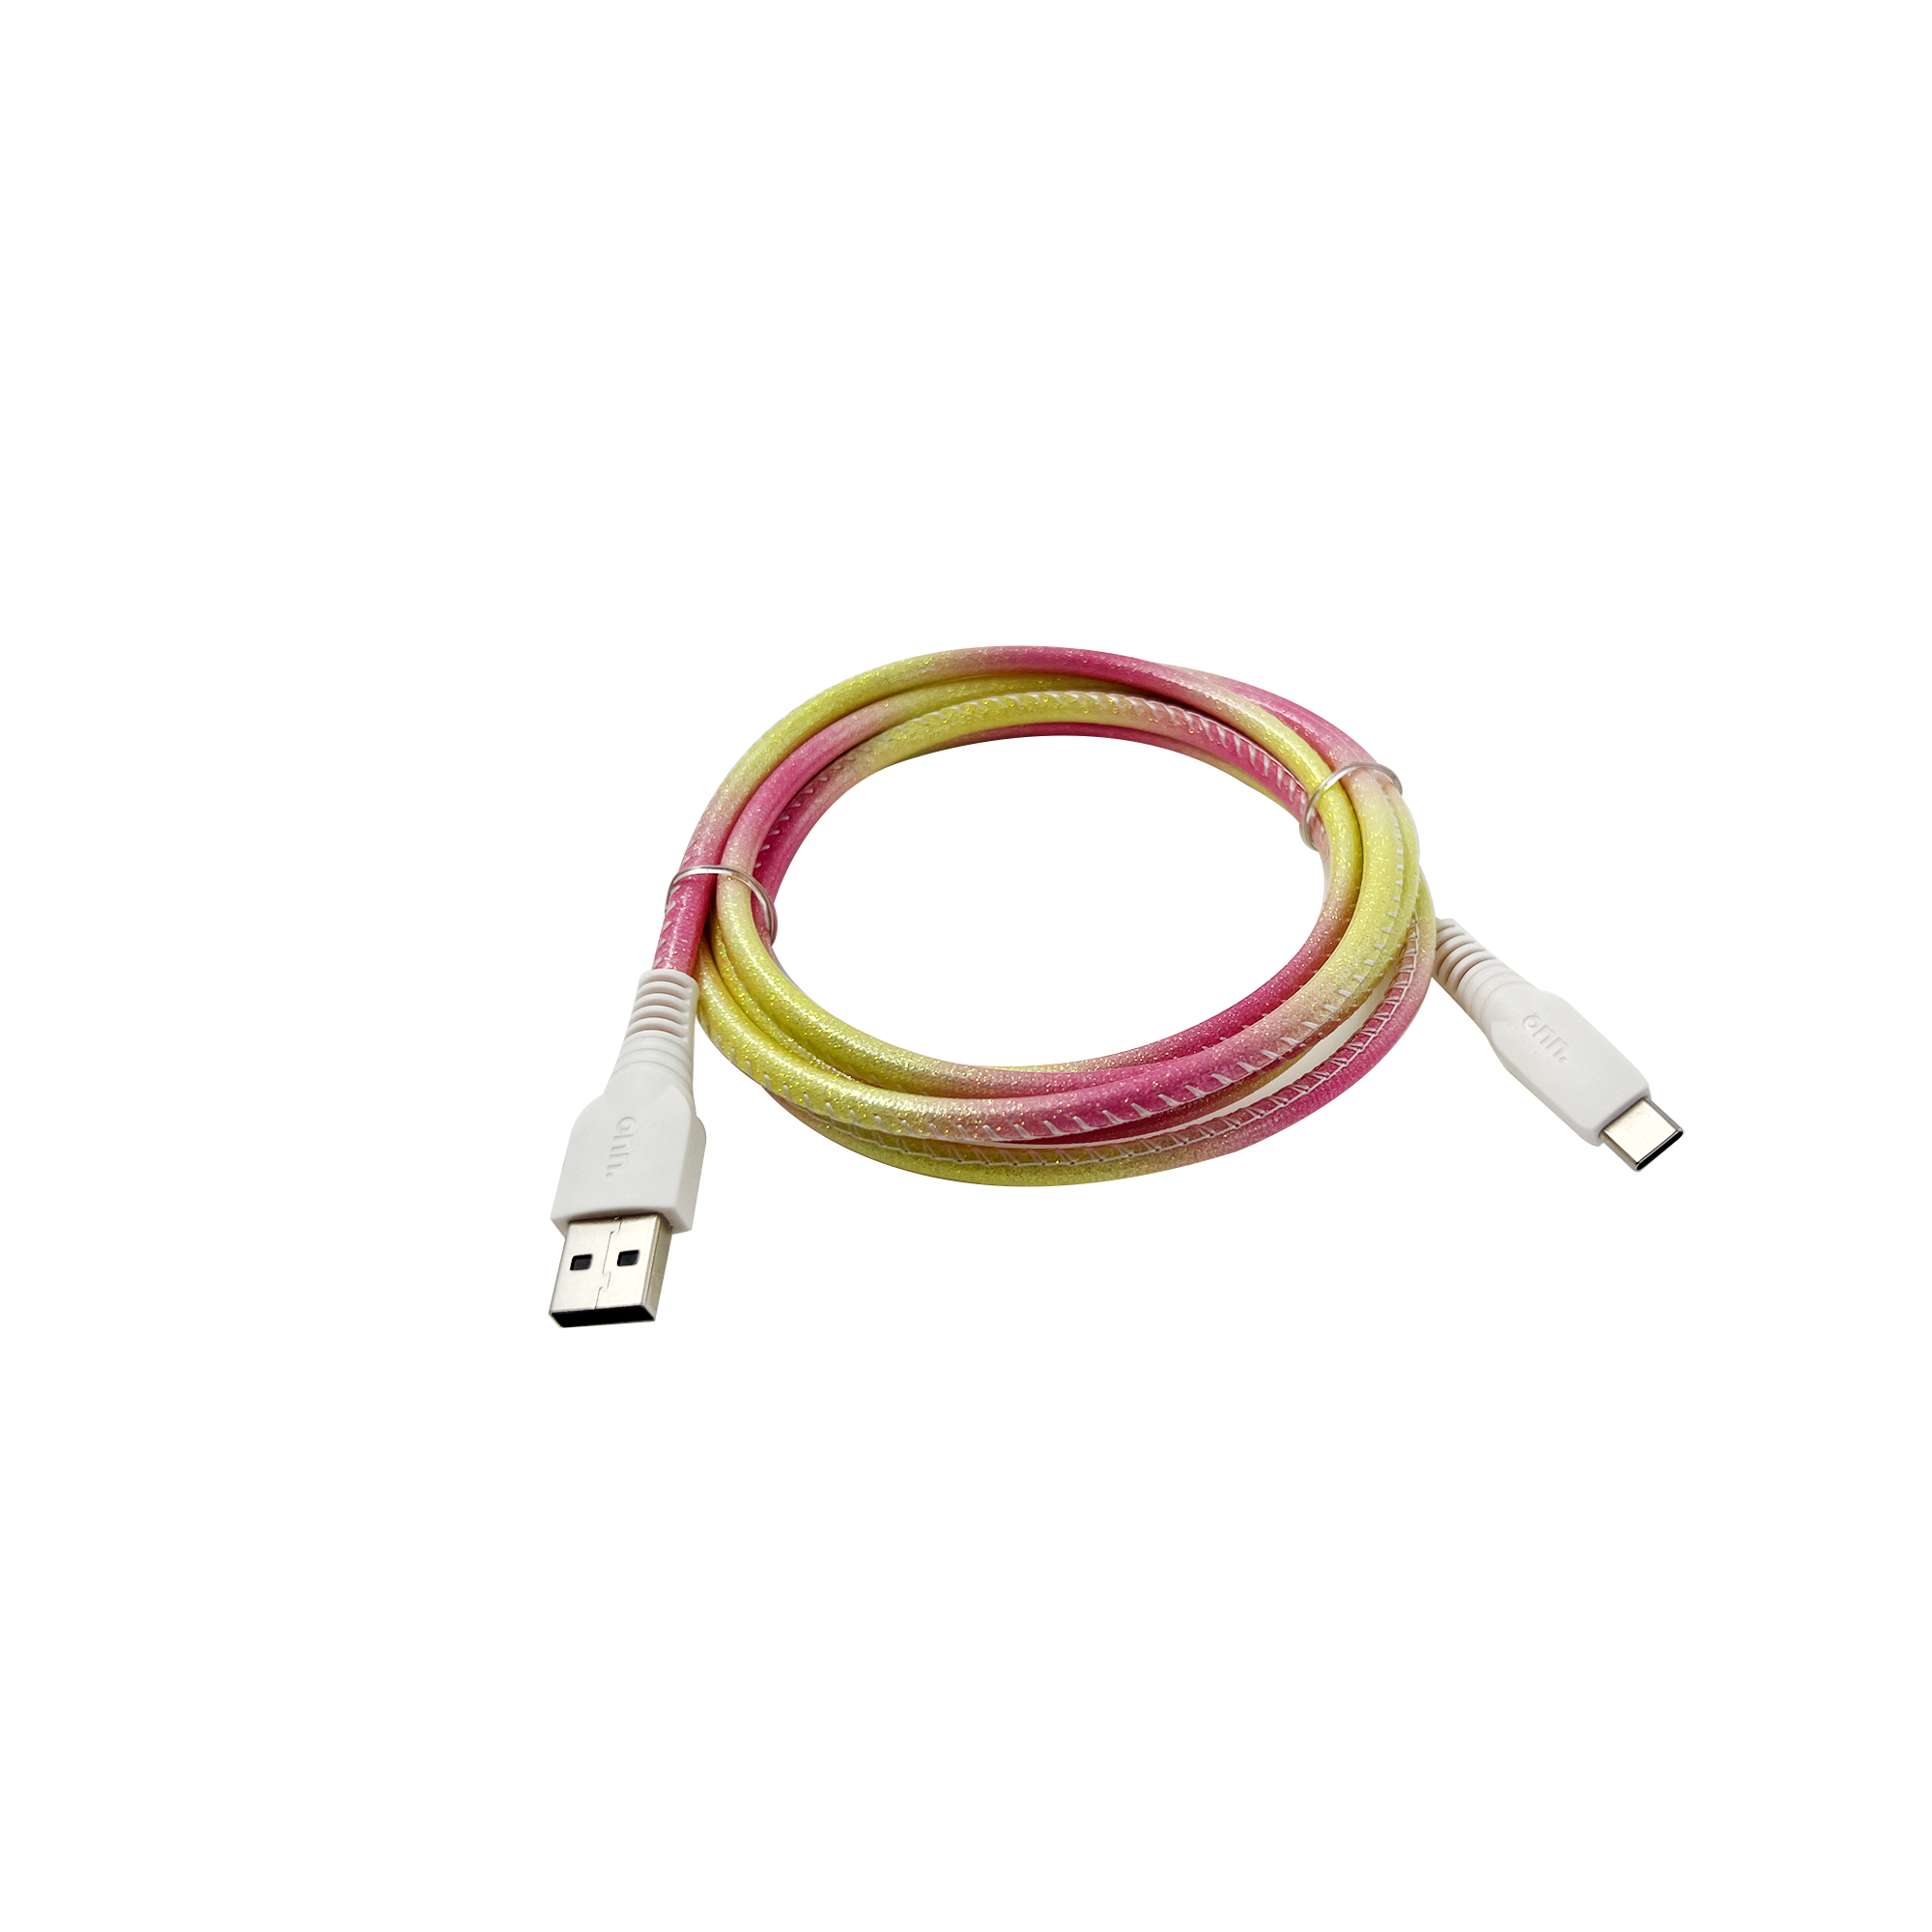 onn. USB to USB-C Glitter Cable, 6' Cord, Yellow & Pink 